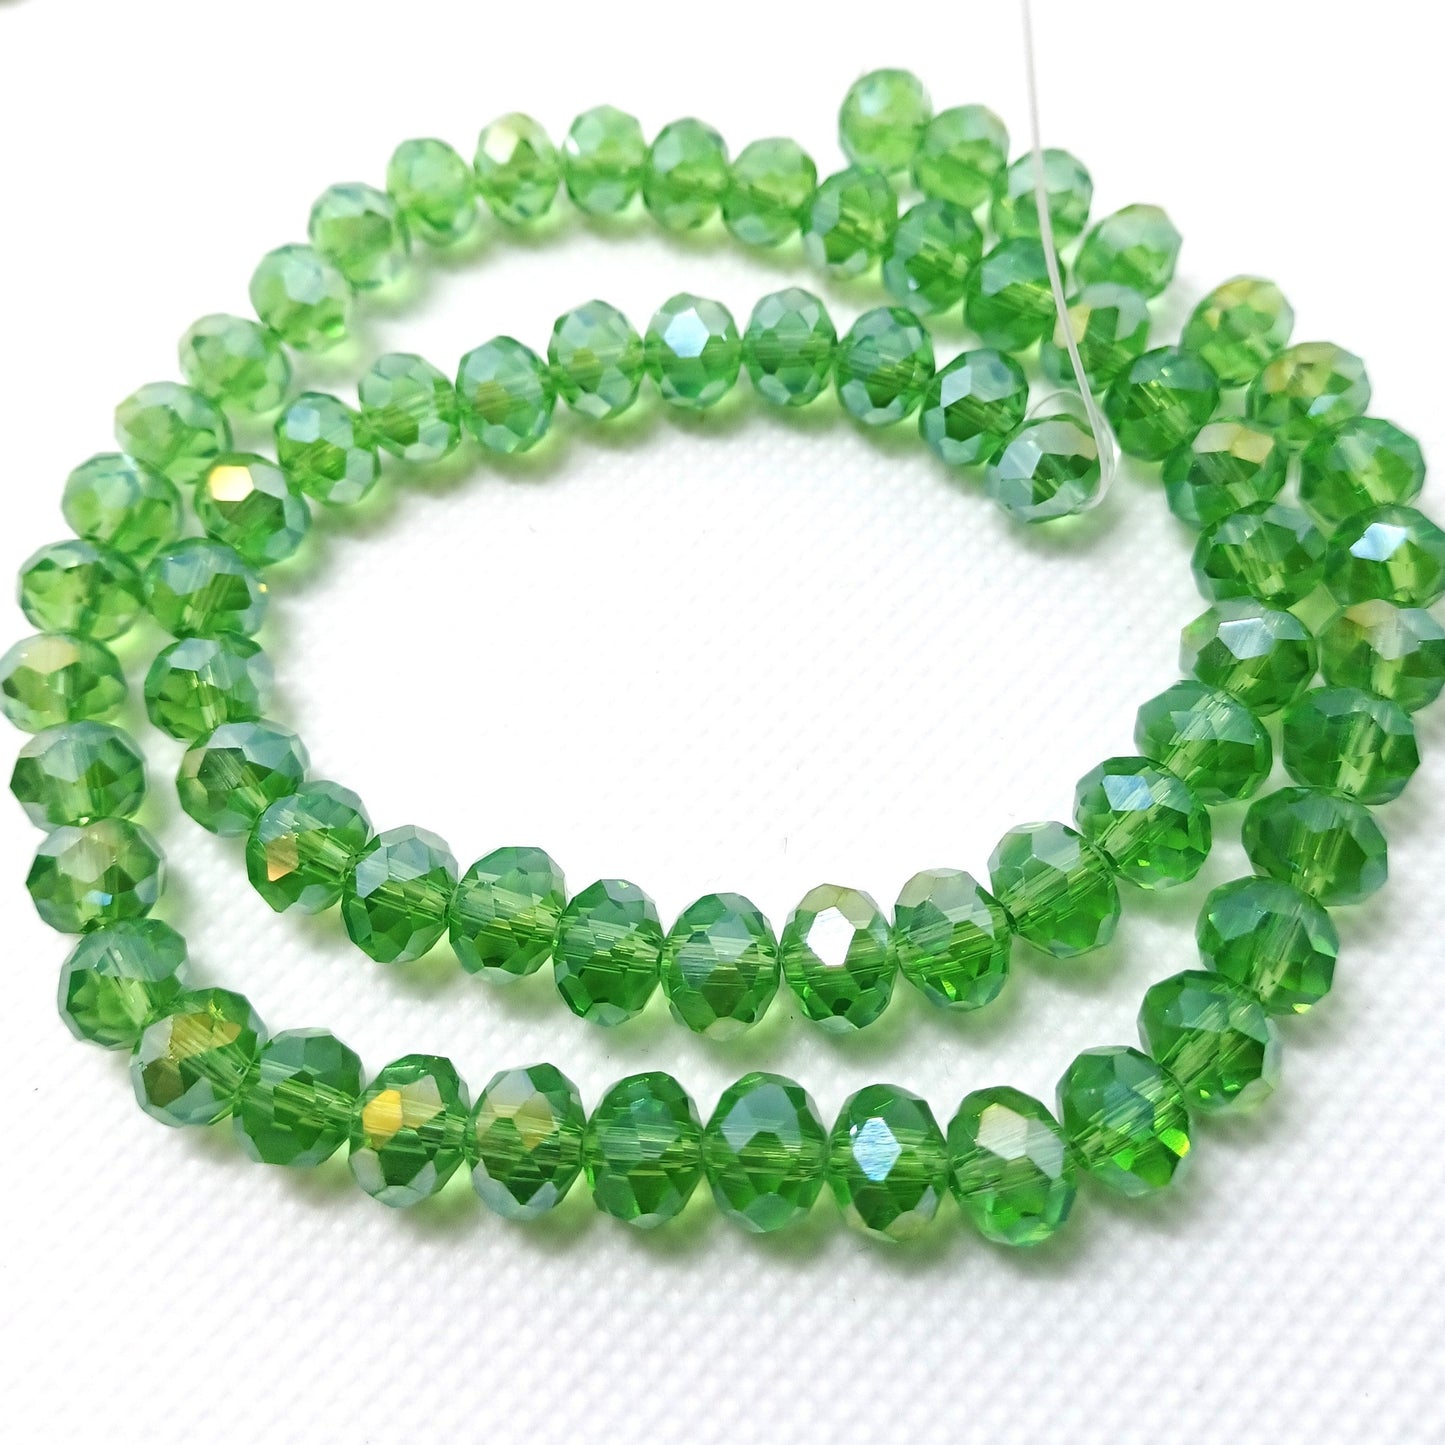 Chinese Crystal Beads Rondelle Shape, Color Green with Gold AB Plating 8mm X 6mm Beads